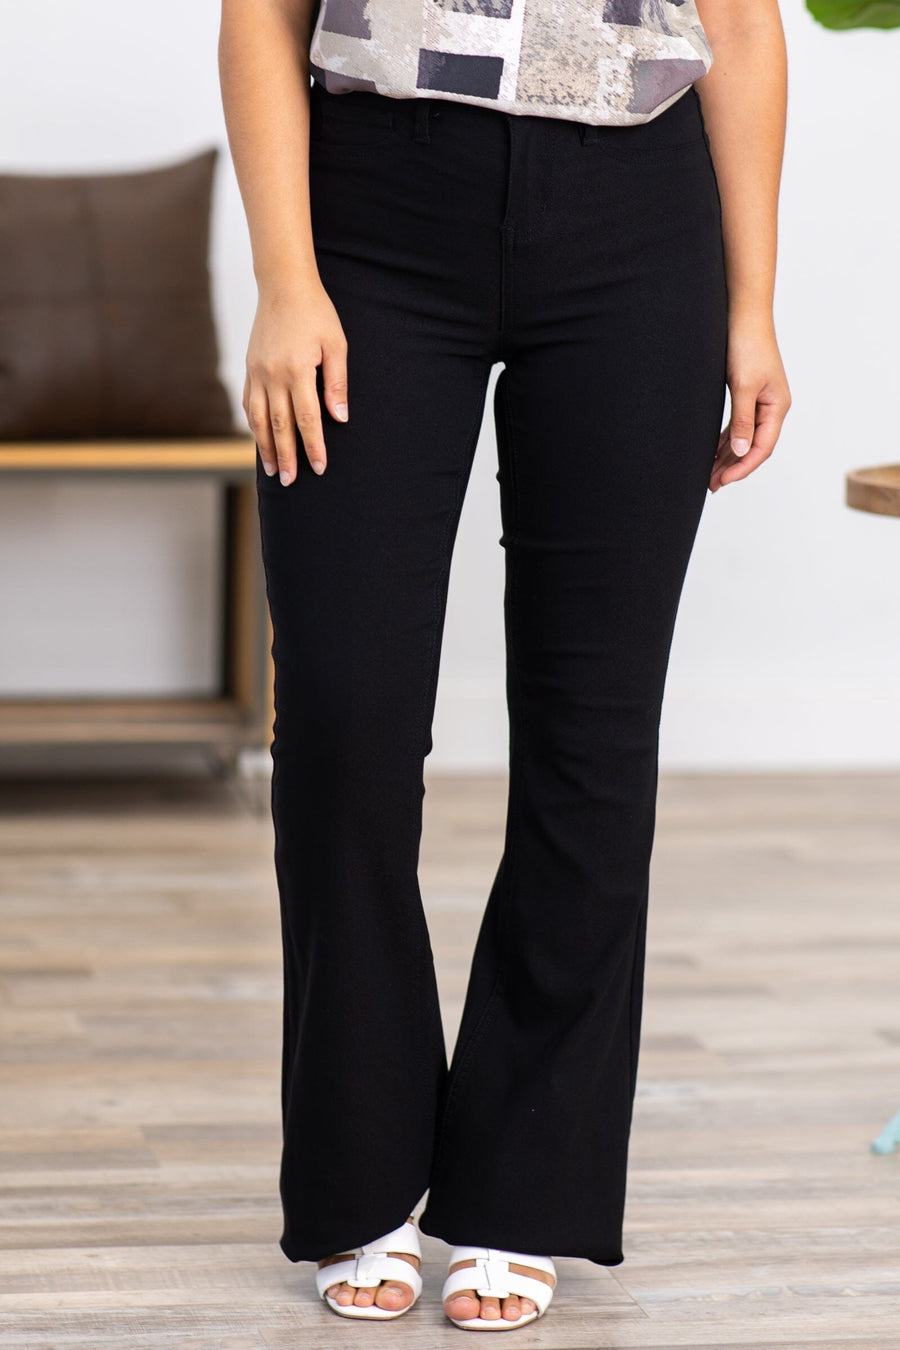 YMI Black Hyperstretch Flare Pants - Filly Flair